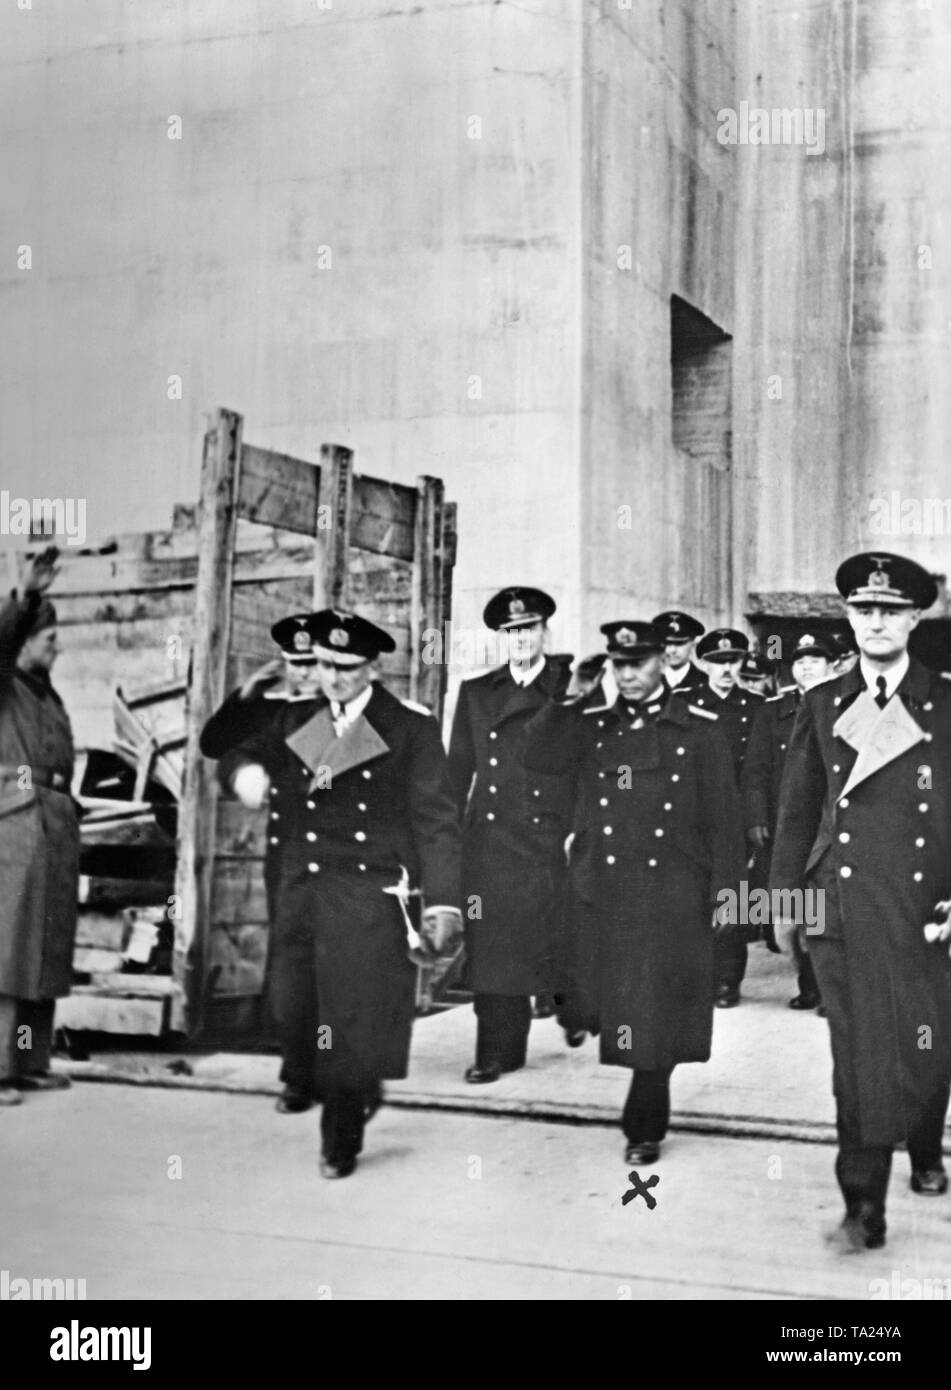 The Japanese Vice Admiral Katsuo Abe (2nd from right) visits a submarine base in Bergen on January 21, 1944 with the German Admiral Otto von Schrader (left of Abe). Stock Photo